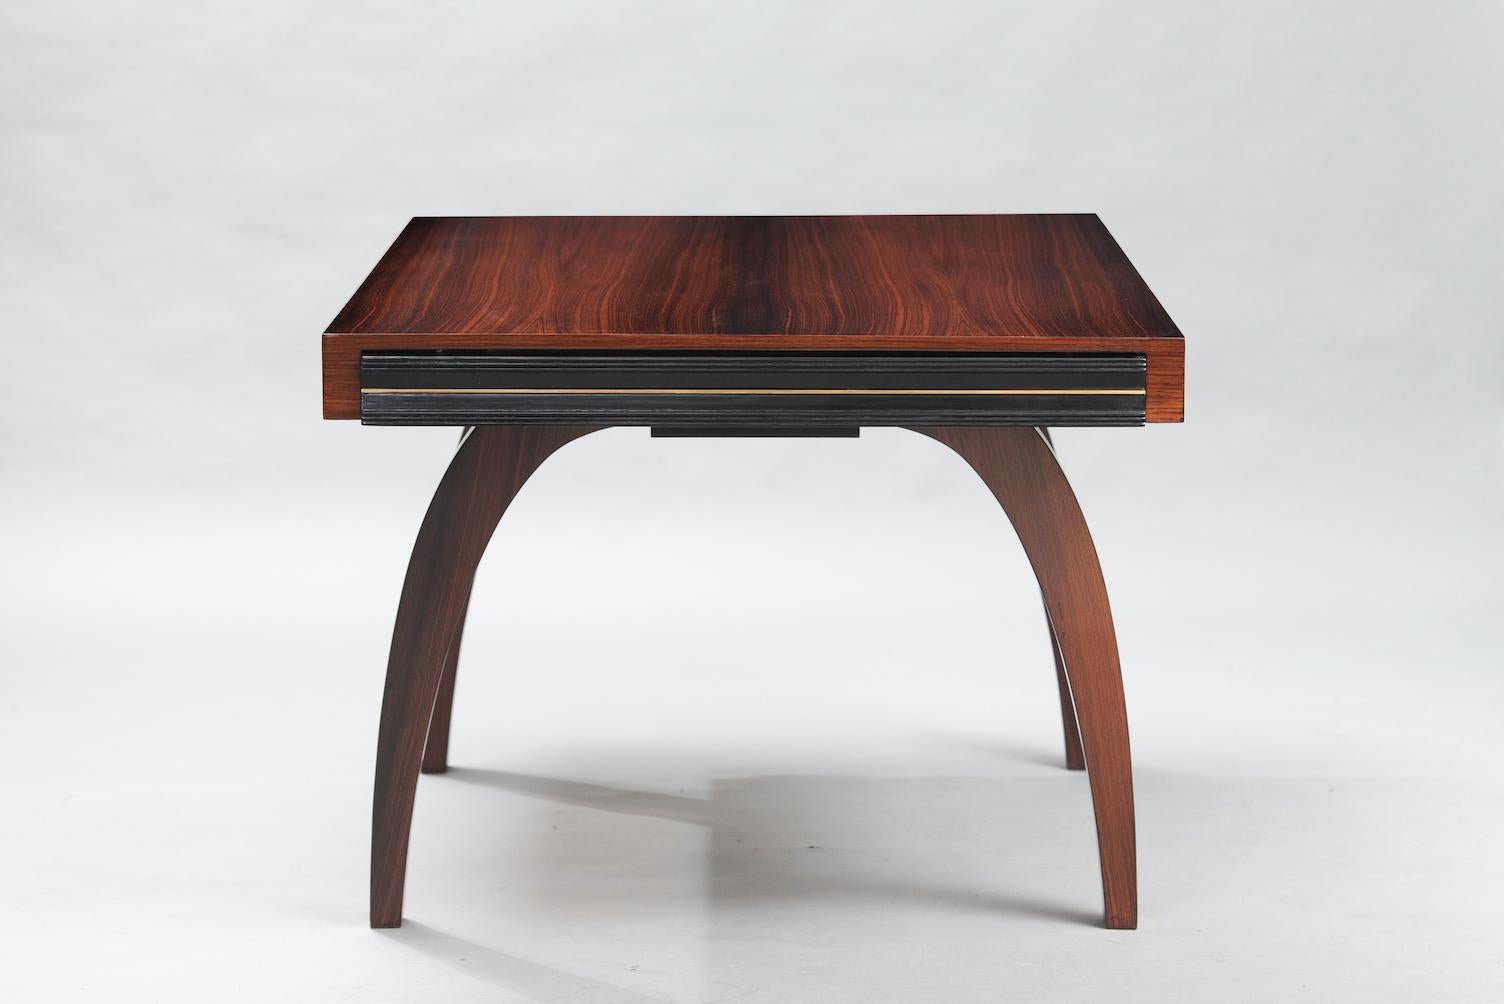 French Art deco rosewood extendable dining table.
Top dimensions:
Open 345cm
Closed 157cm.
 